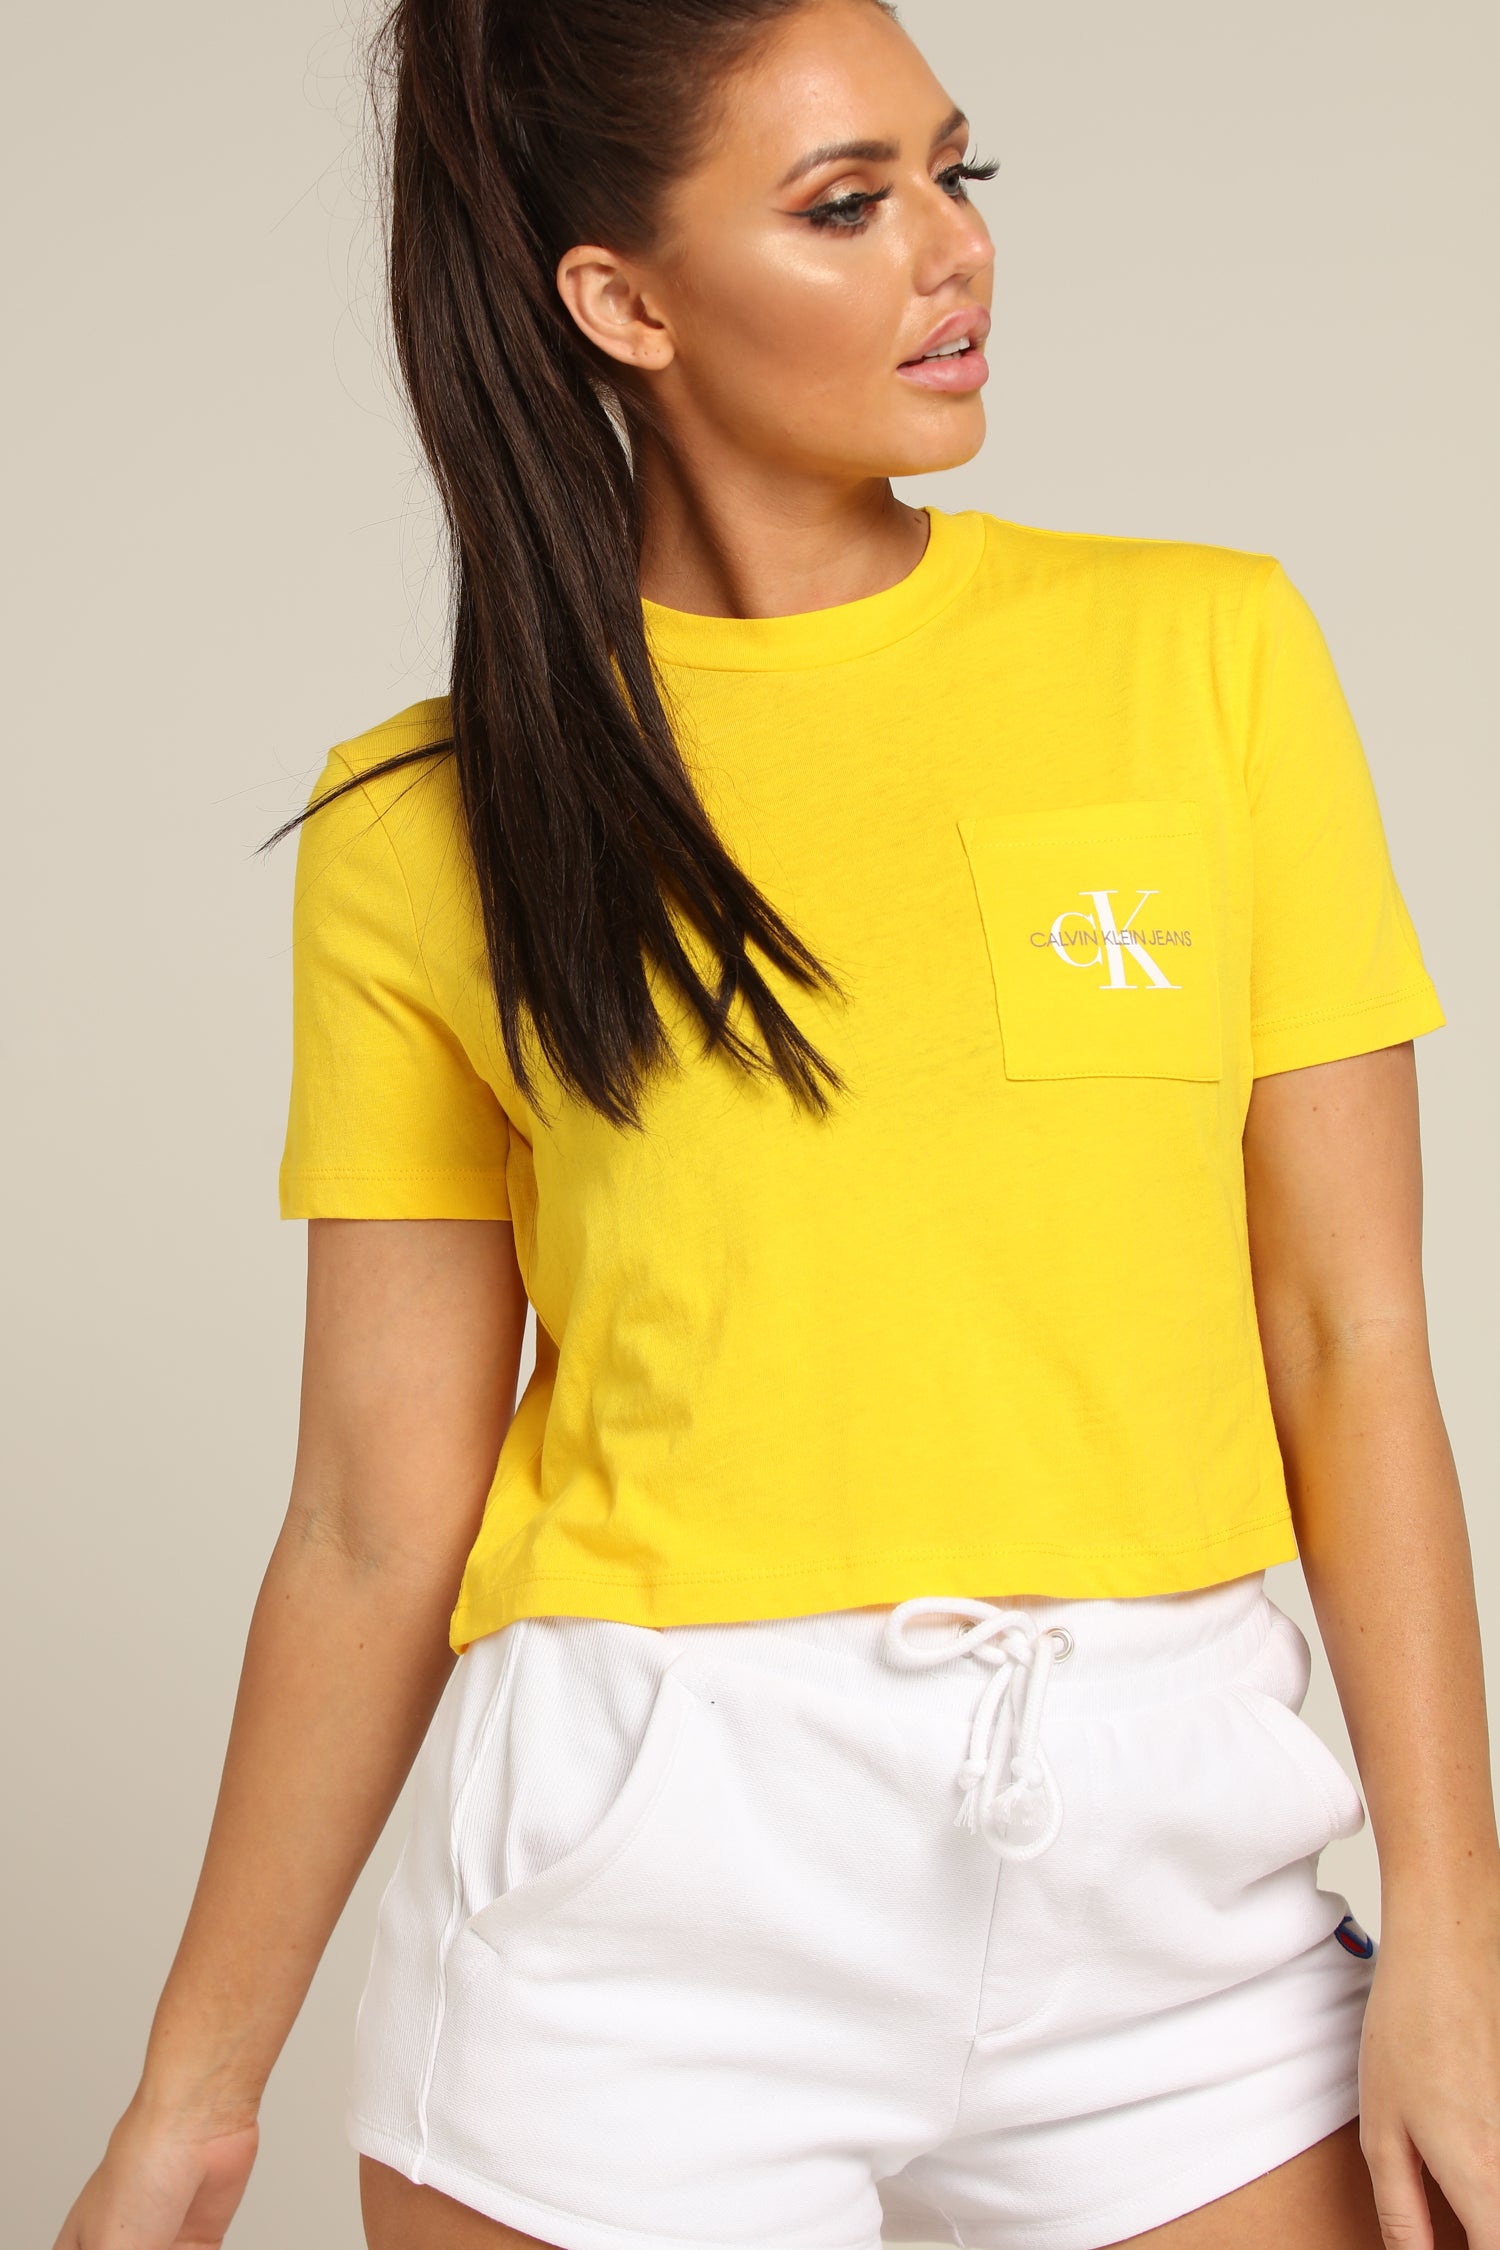 calvin klein jeans cropped t shirt with pocket logo